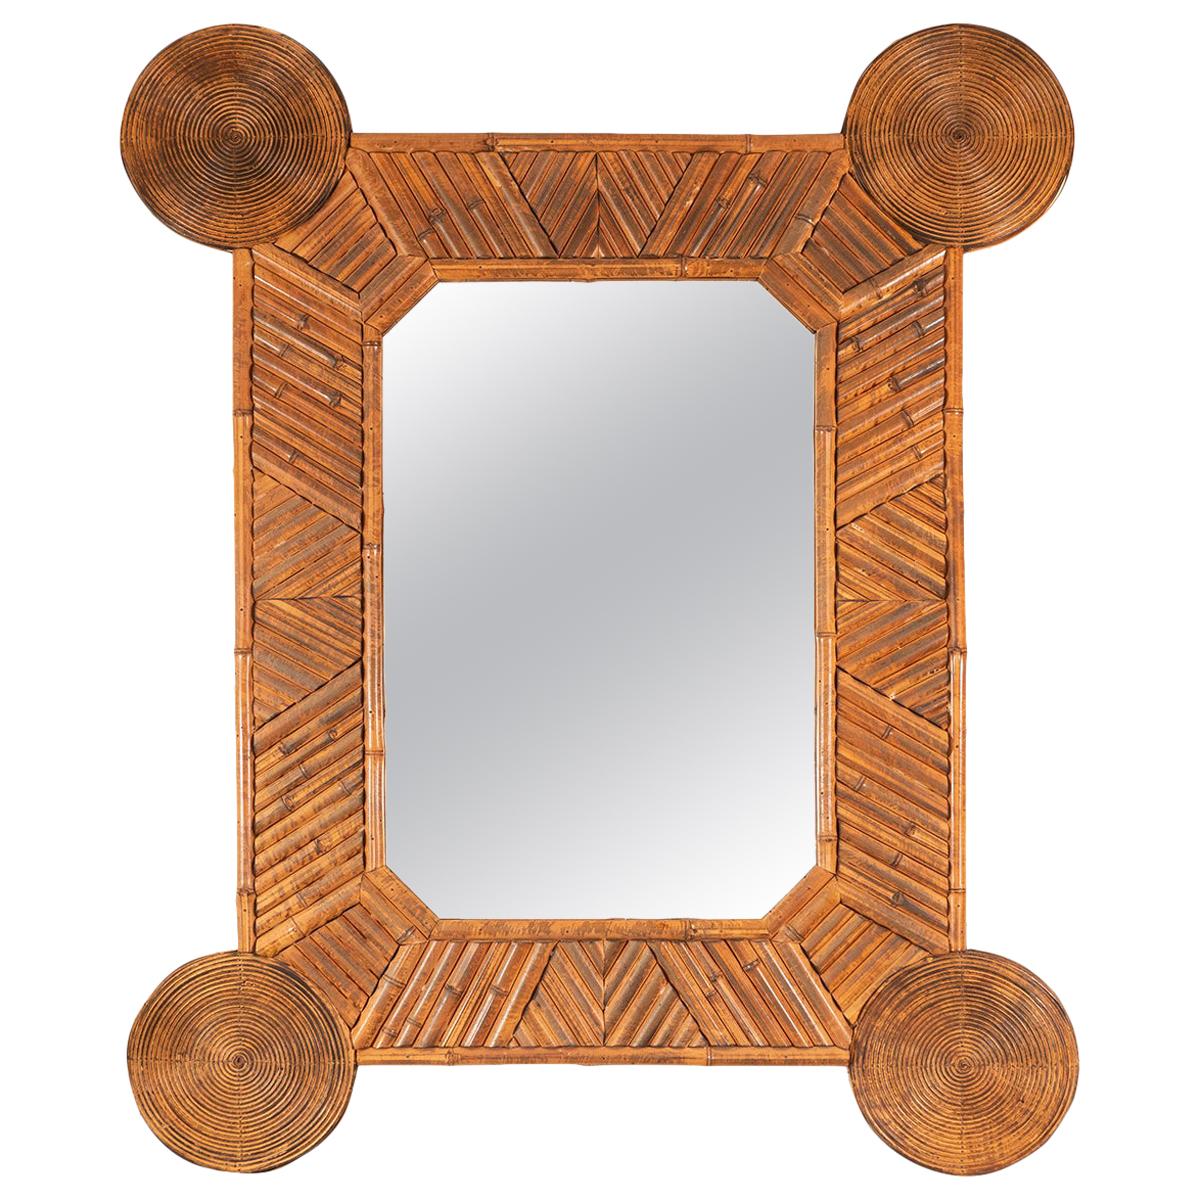 Unusual Mirror with Intricate Bamboo Surround